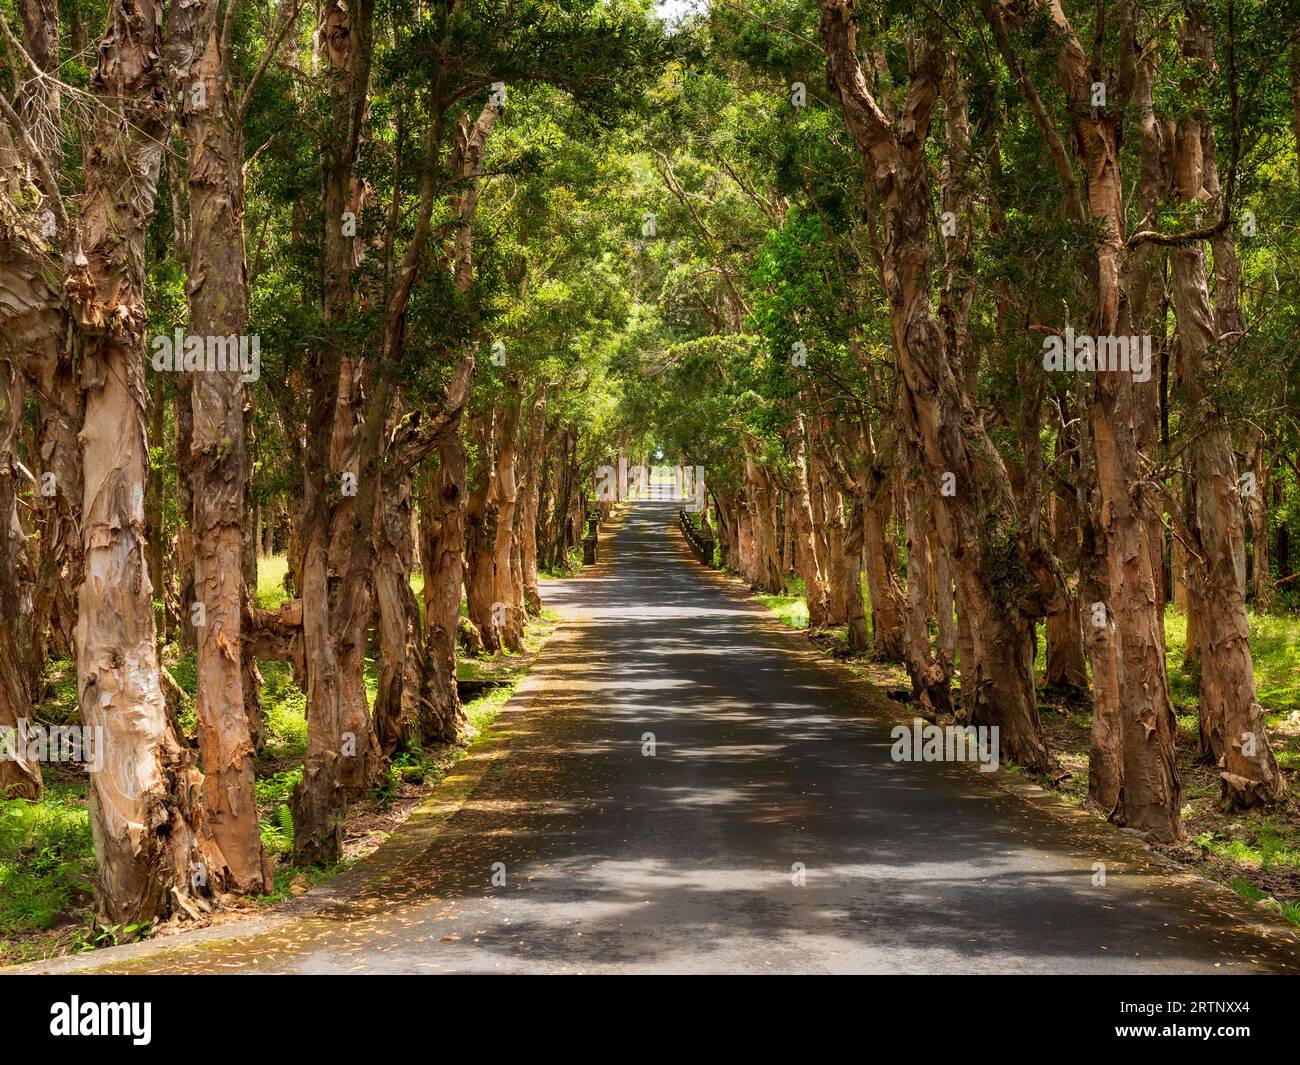 Looking down an avenue of paper bark trees on the island of Mauritius Stock Photo